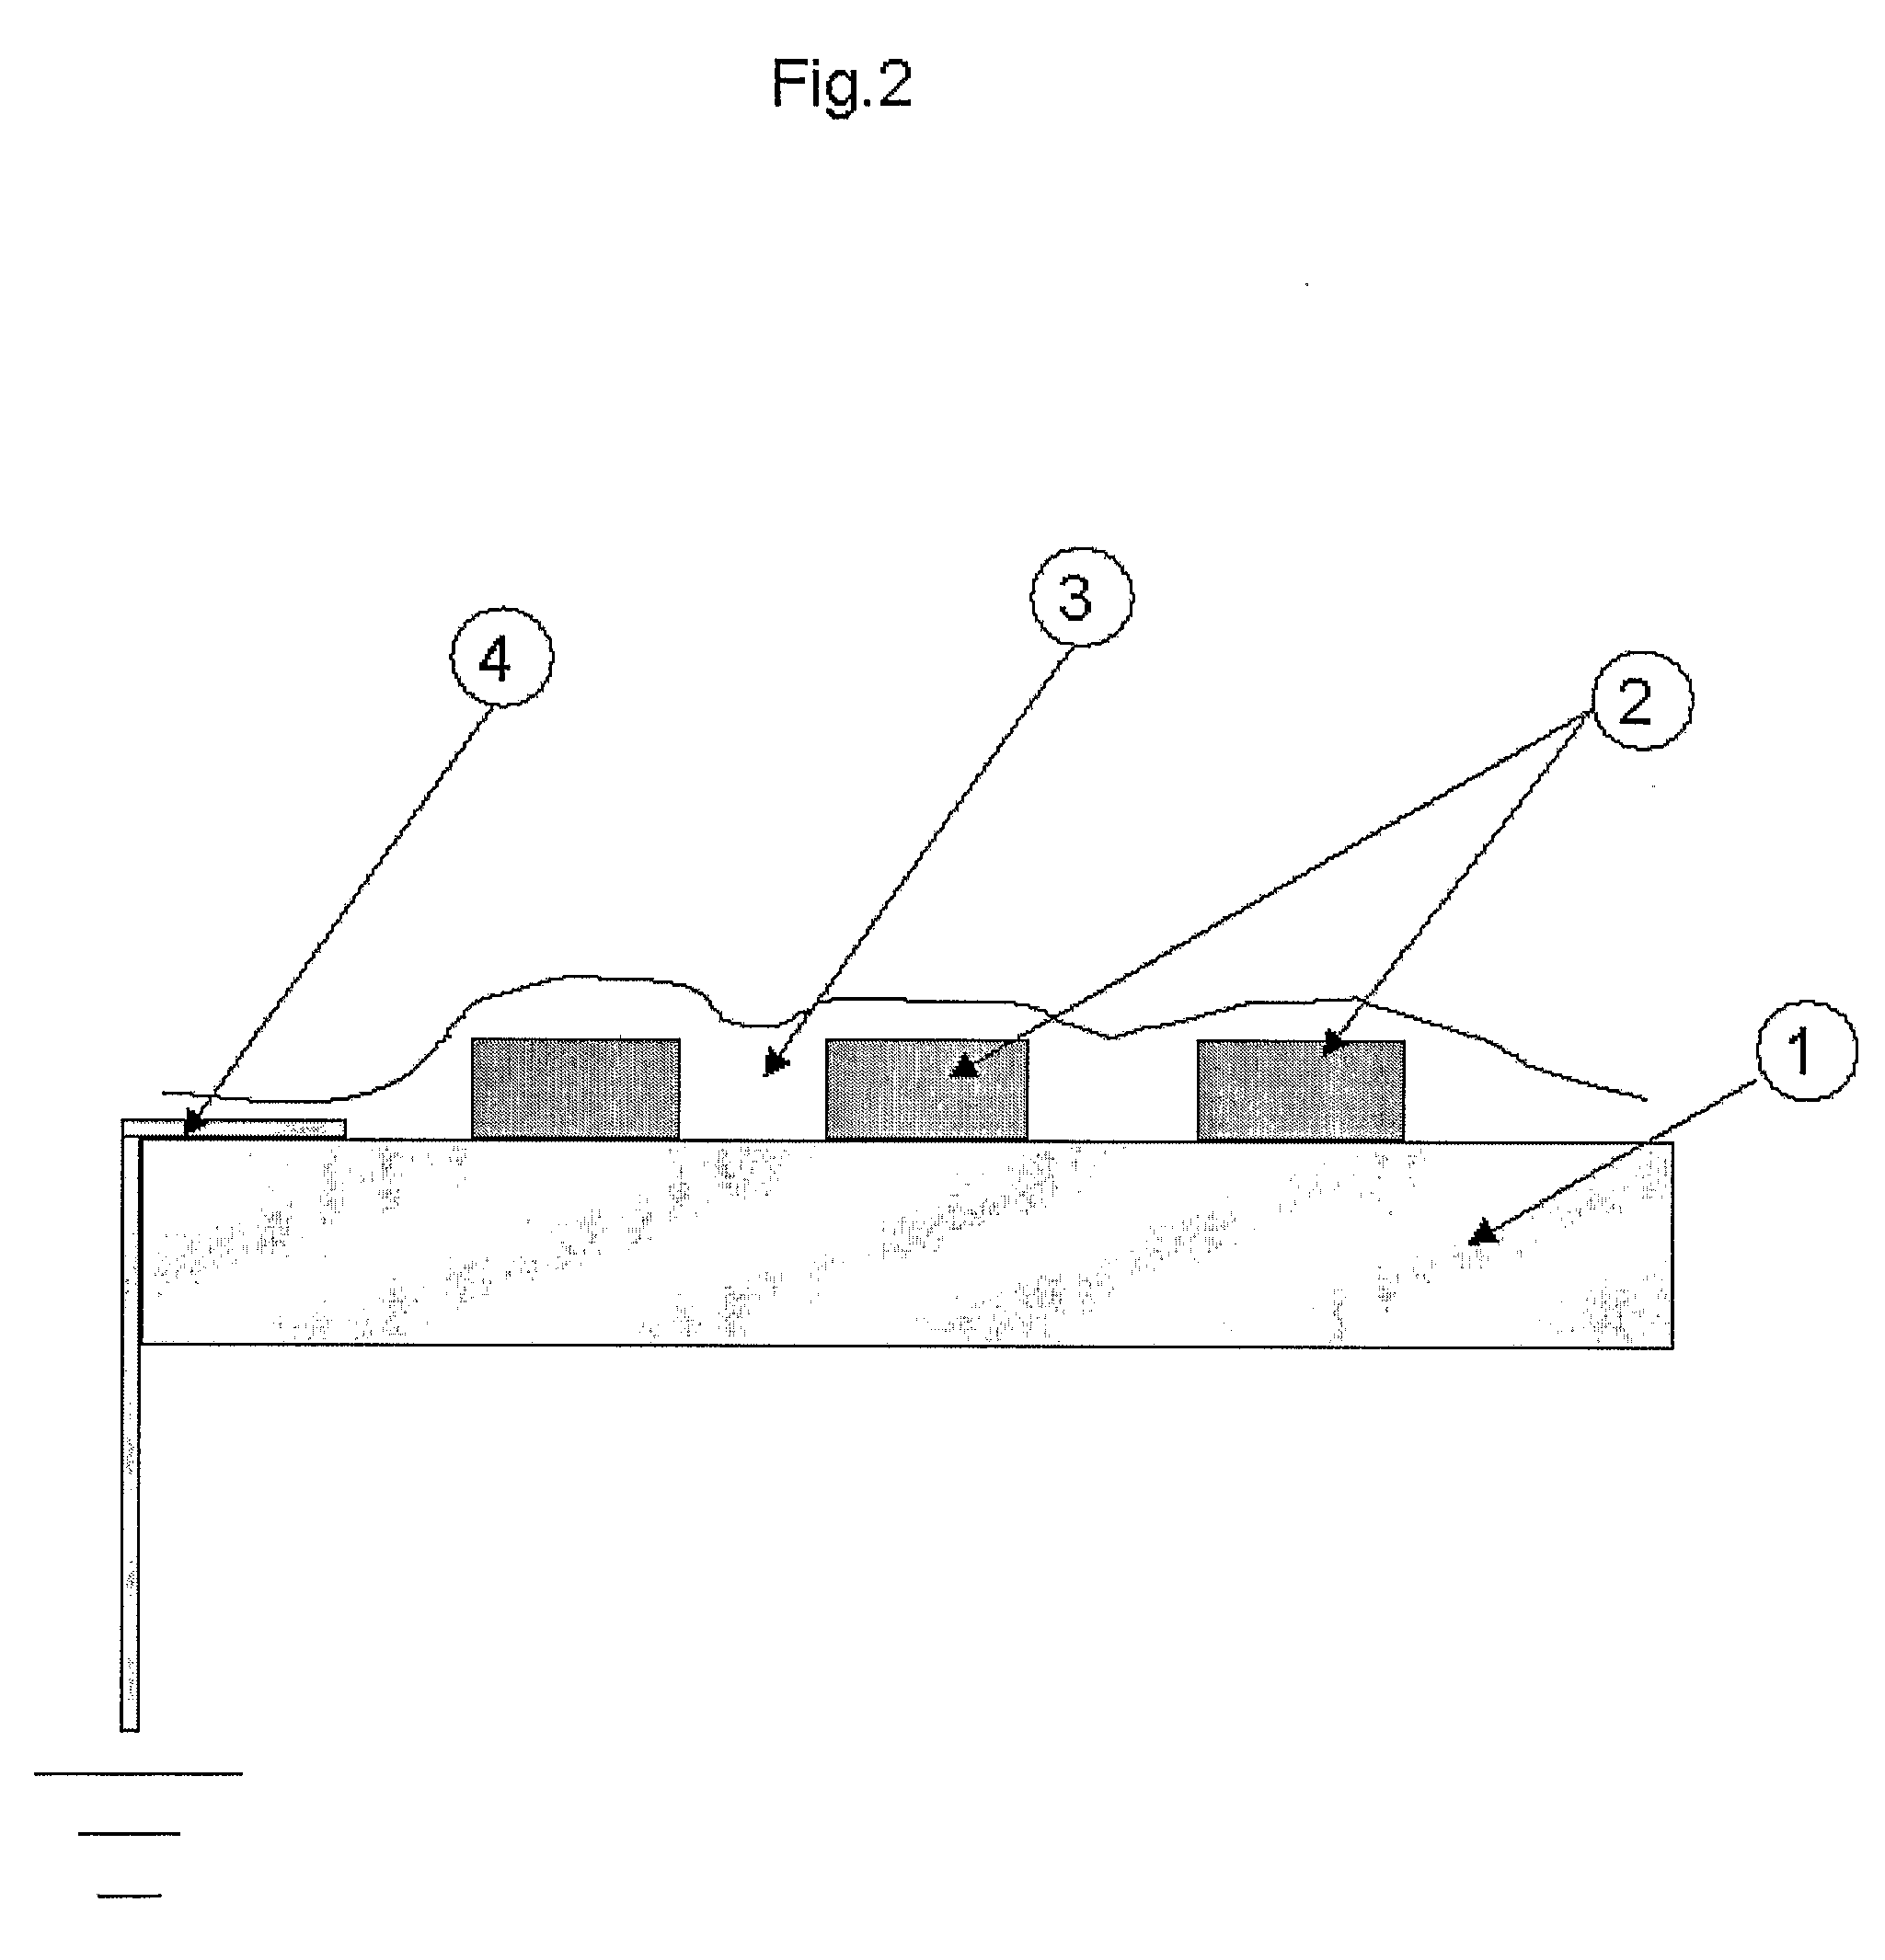 Antistatic Coating For Surfaces Made Of Metal Materials And Dielectric Materials Or Of Dielectric Materials Only In Particular Antenna Surfaces And Method Of Application Thereof